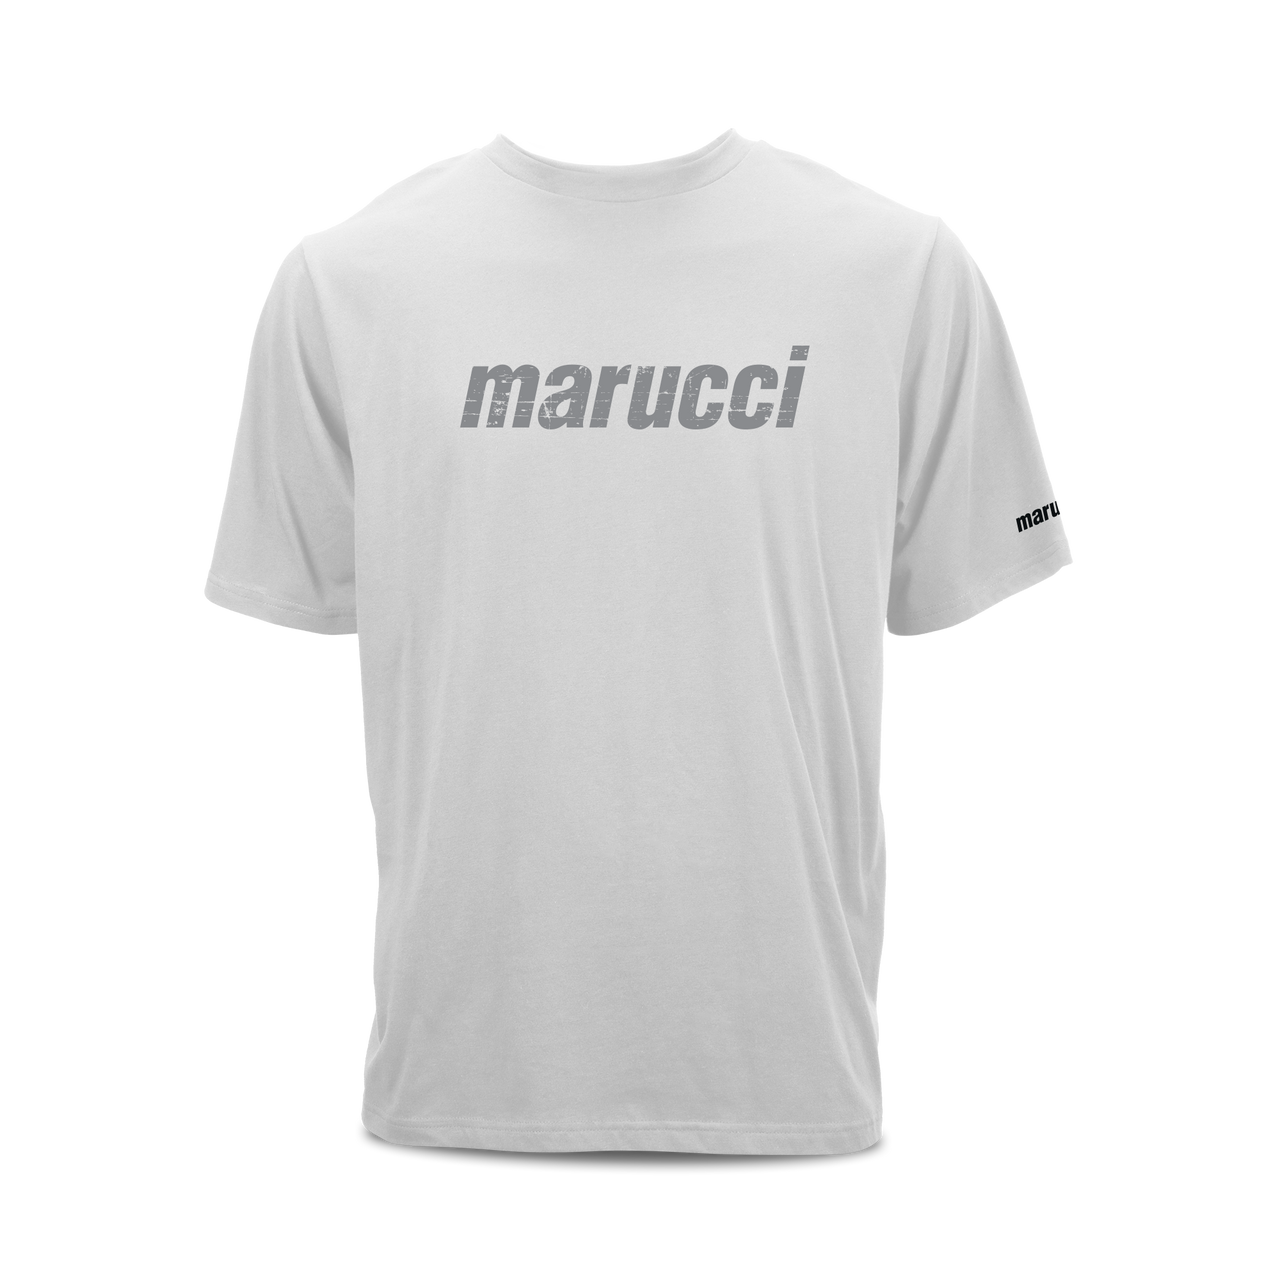 Marucci Youth Pastime Tee White/Gray 